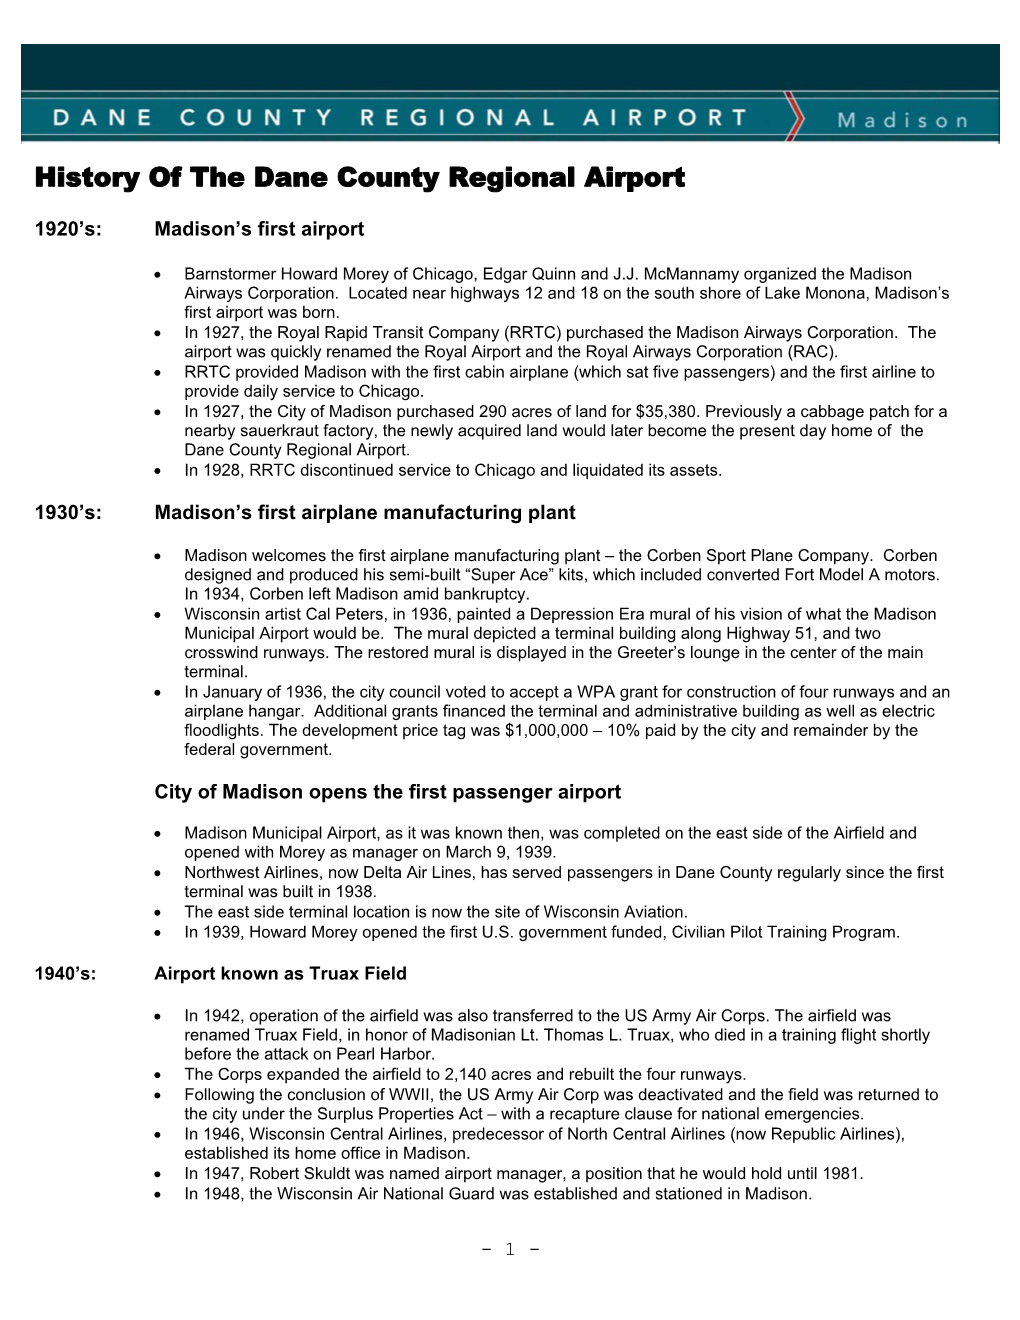 History of the Dane County Regional Airport